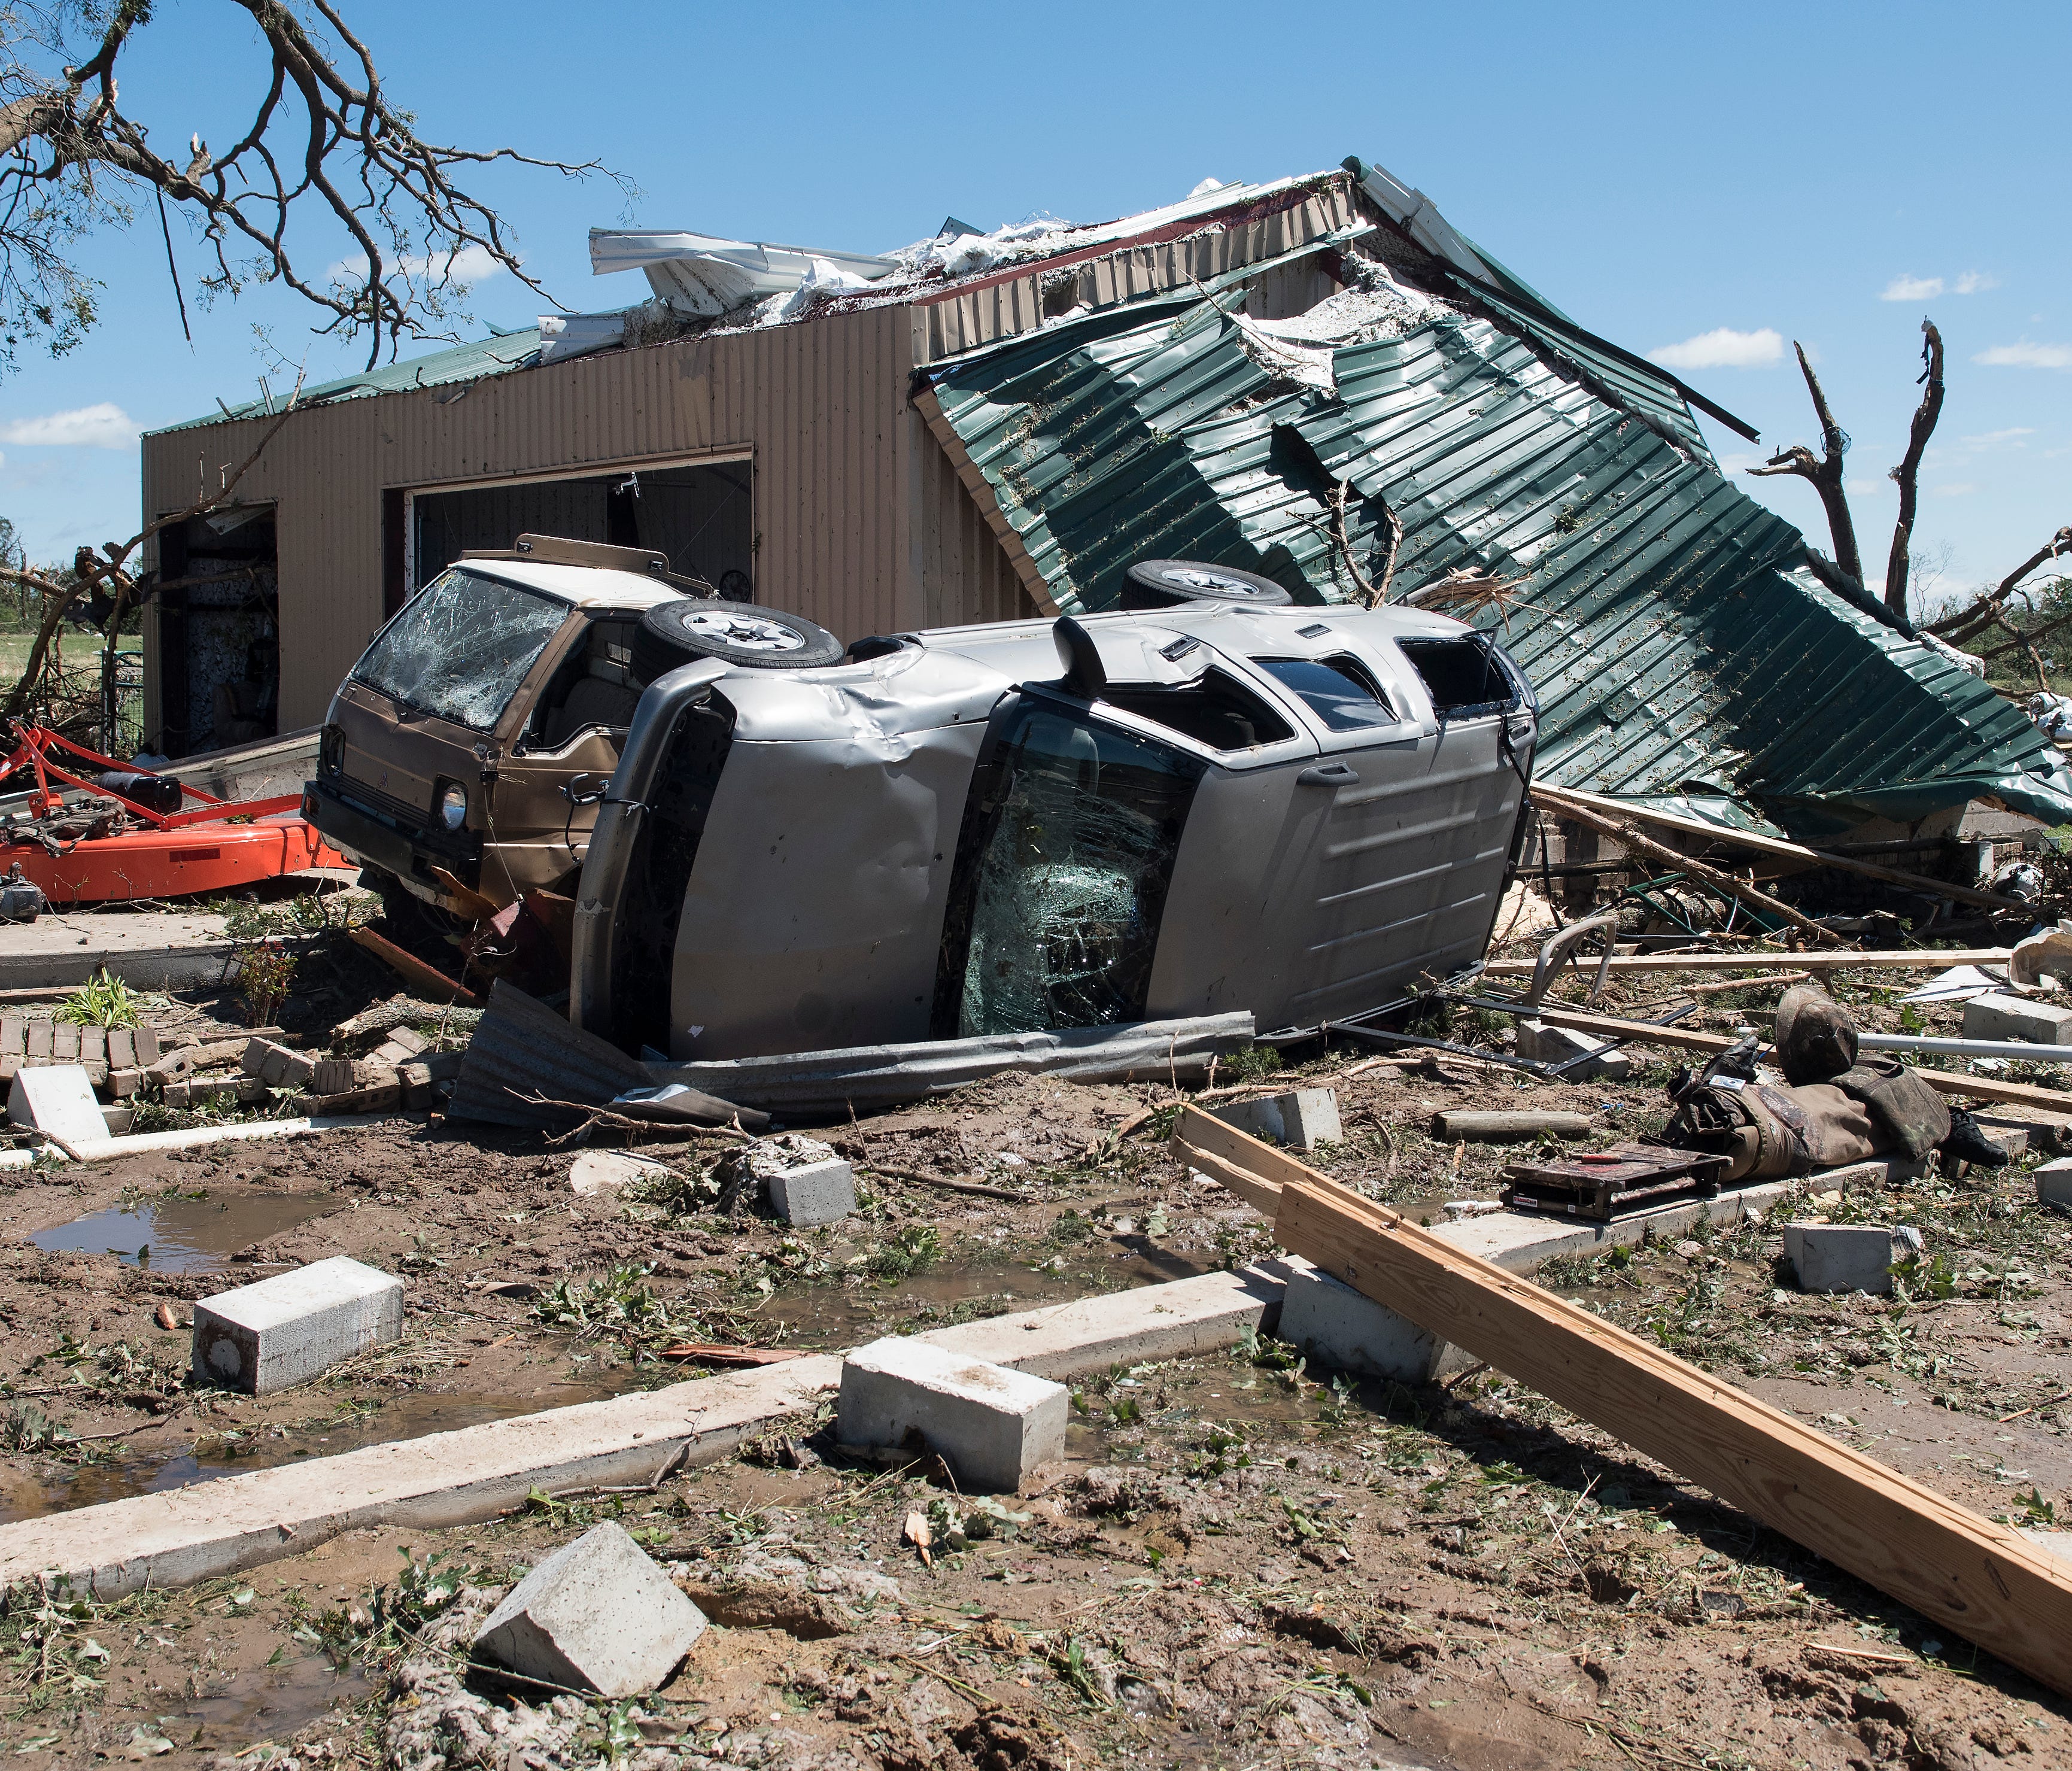 An overturned vehicle rests on the ground surrounded by debris in Canton, Texas, on Sunday after tornadoes hit the area.